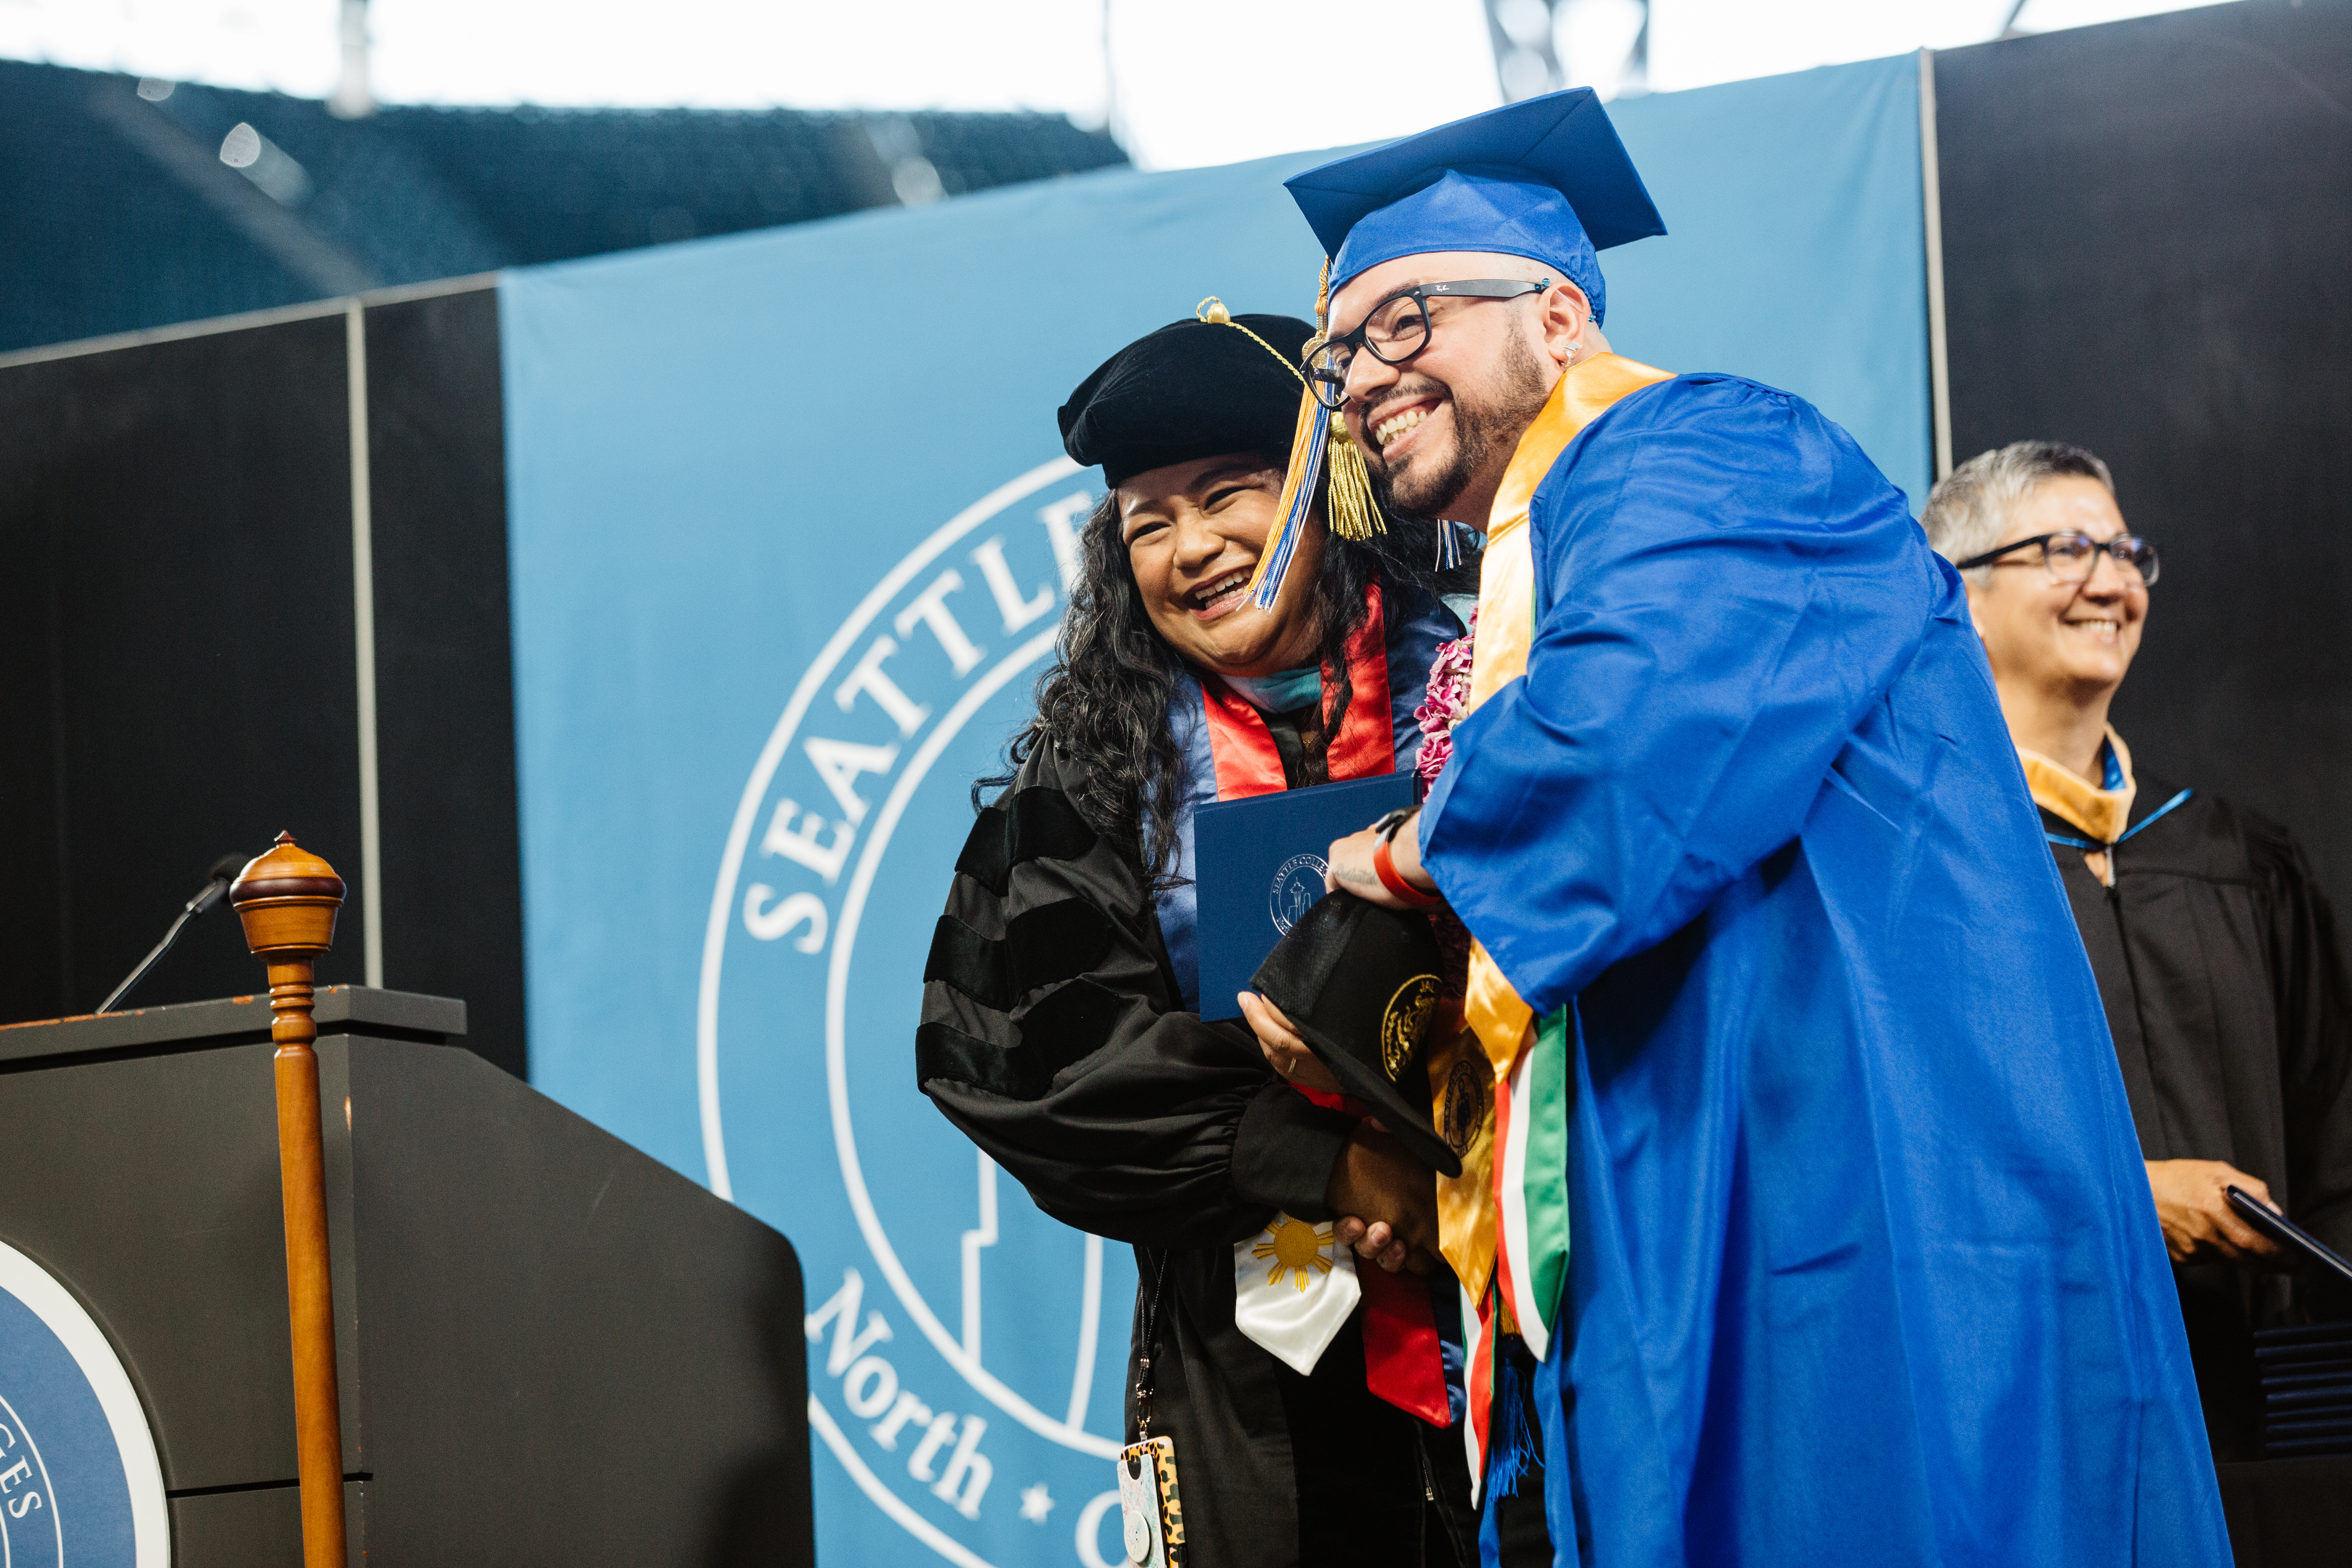 crossing the stage, a student gets a hug from the chancellor